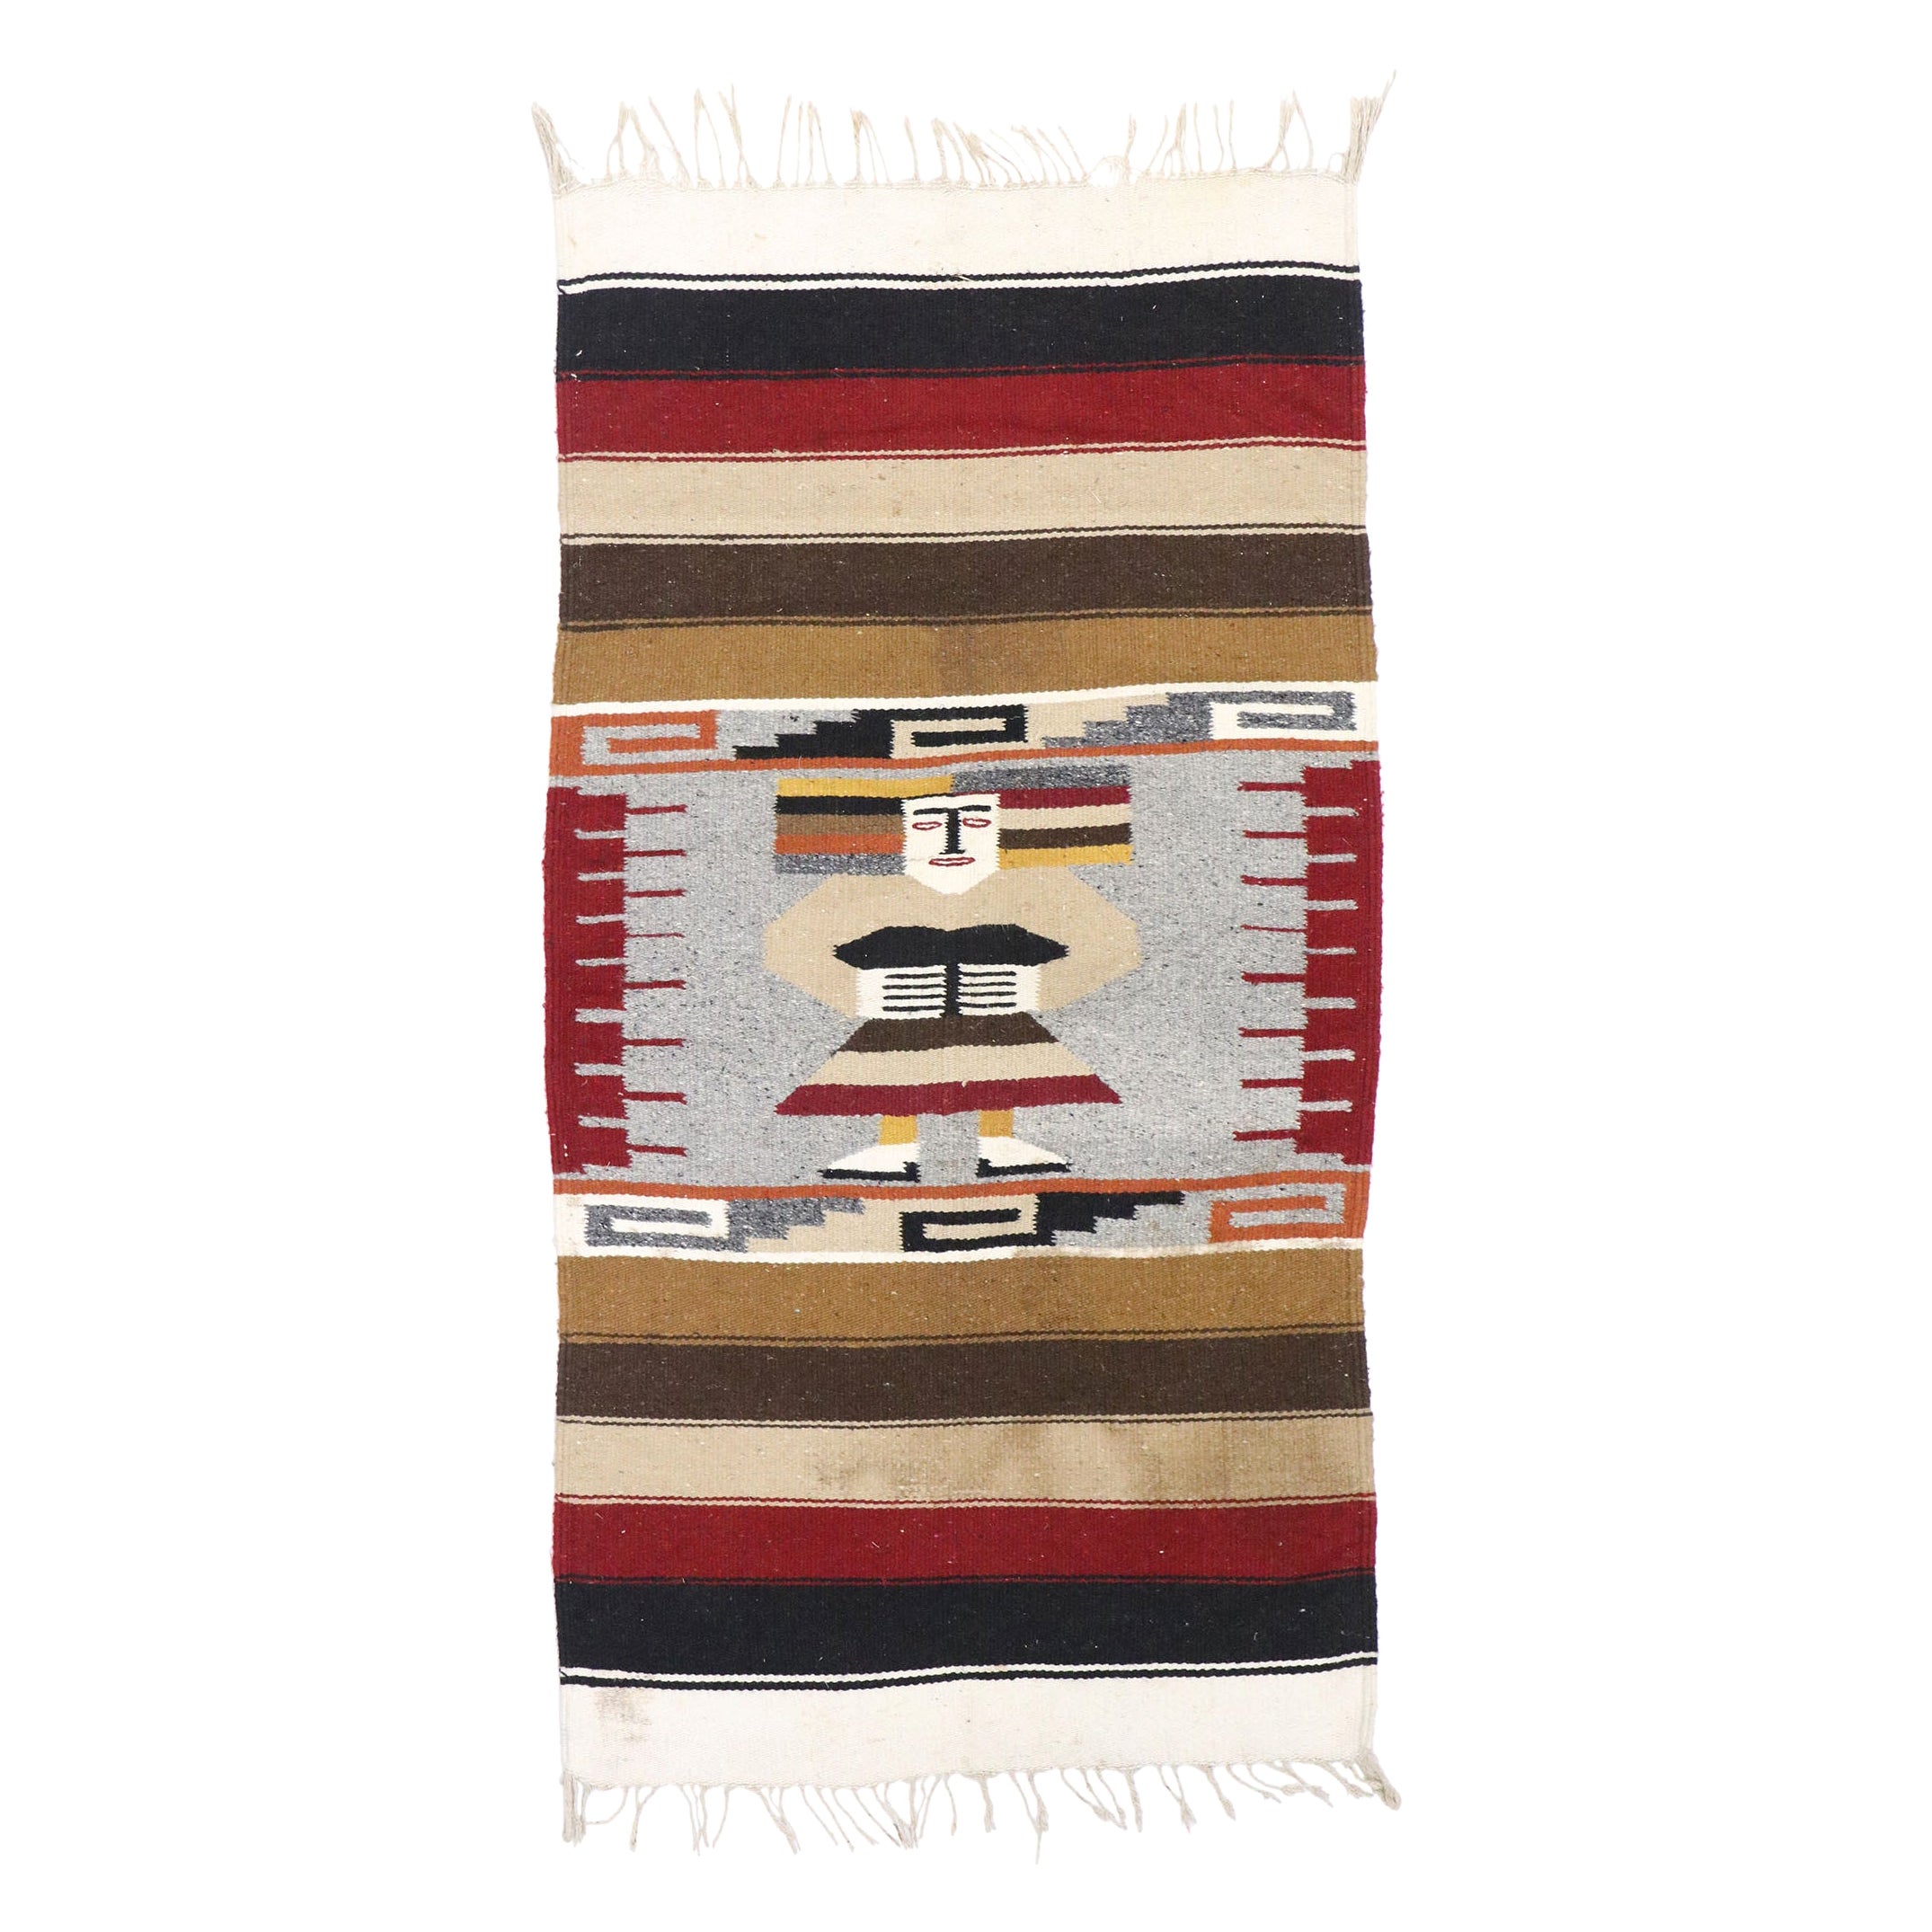 Vintage Mexican Blanket with Aztec Figure, Throw Rug